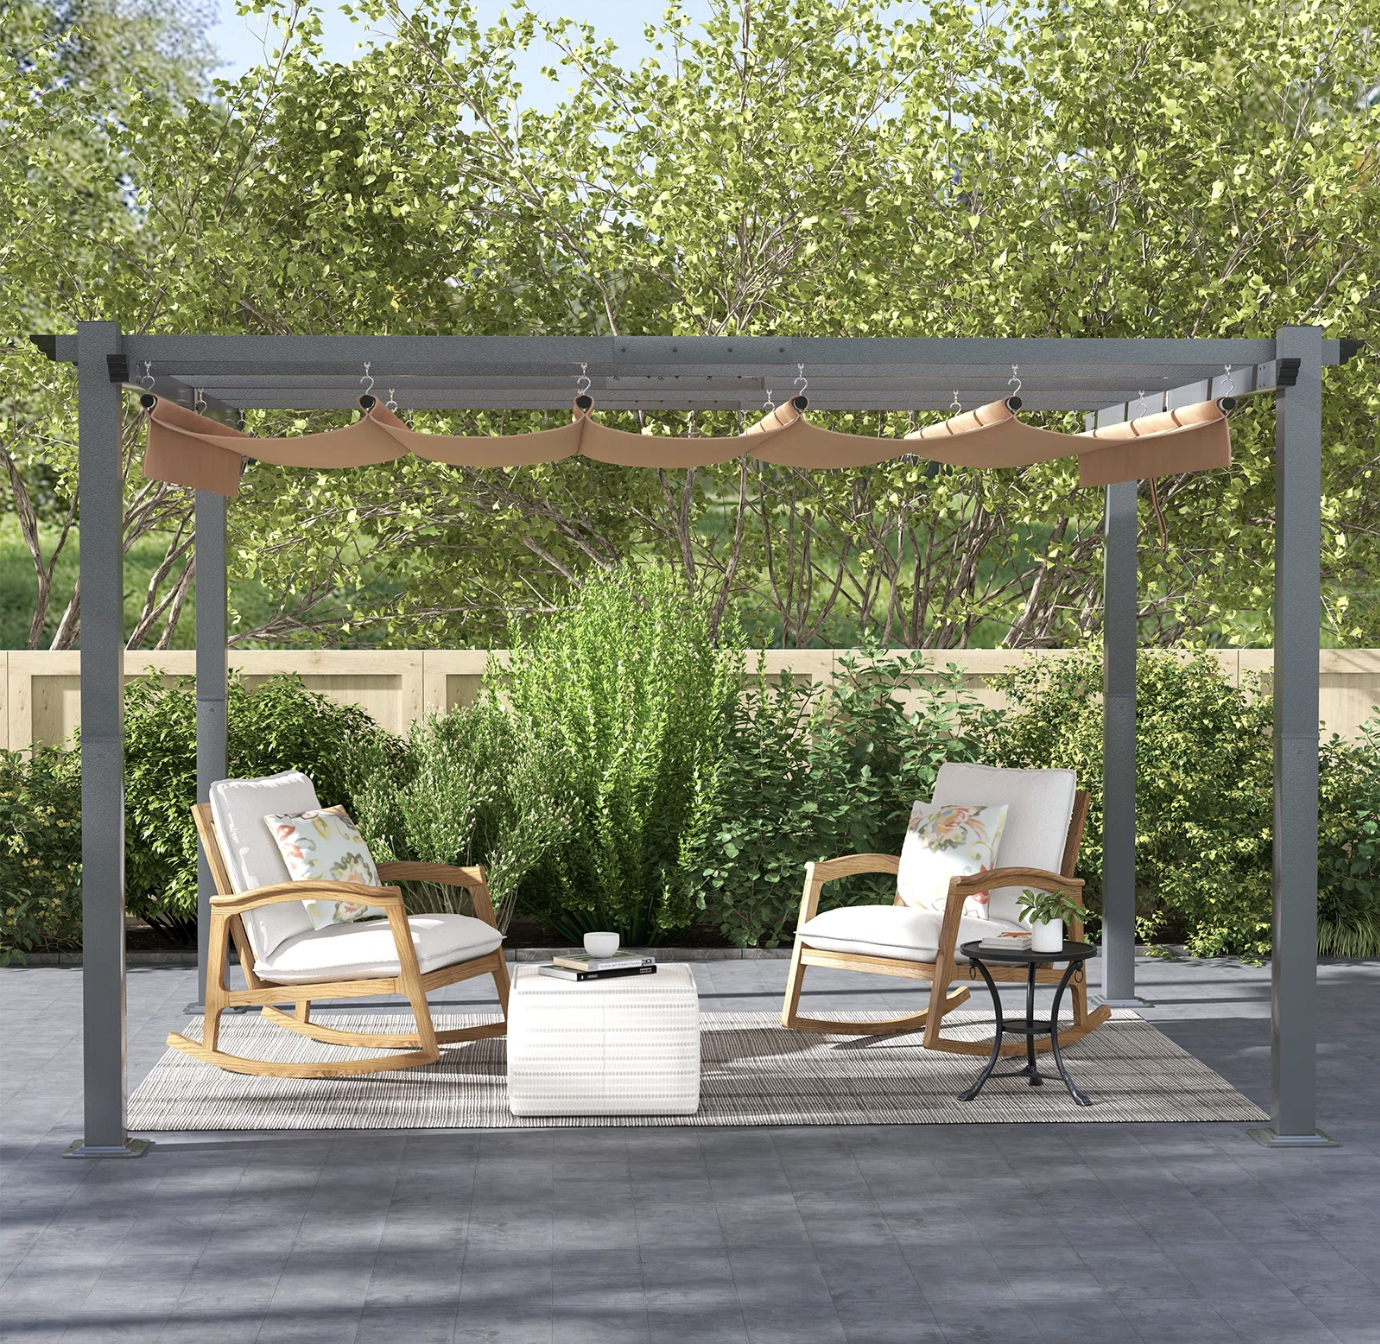 Metal pergola with a cocoa-colored canopy, with patio furniture underneath.